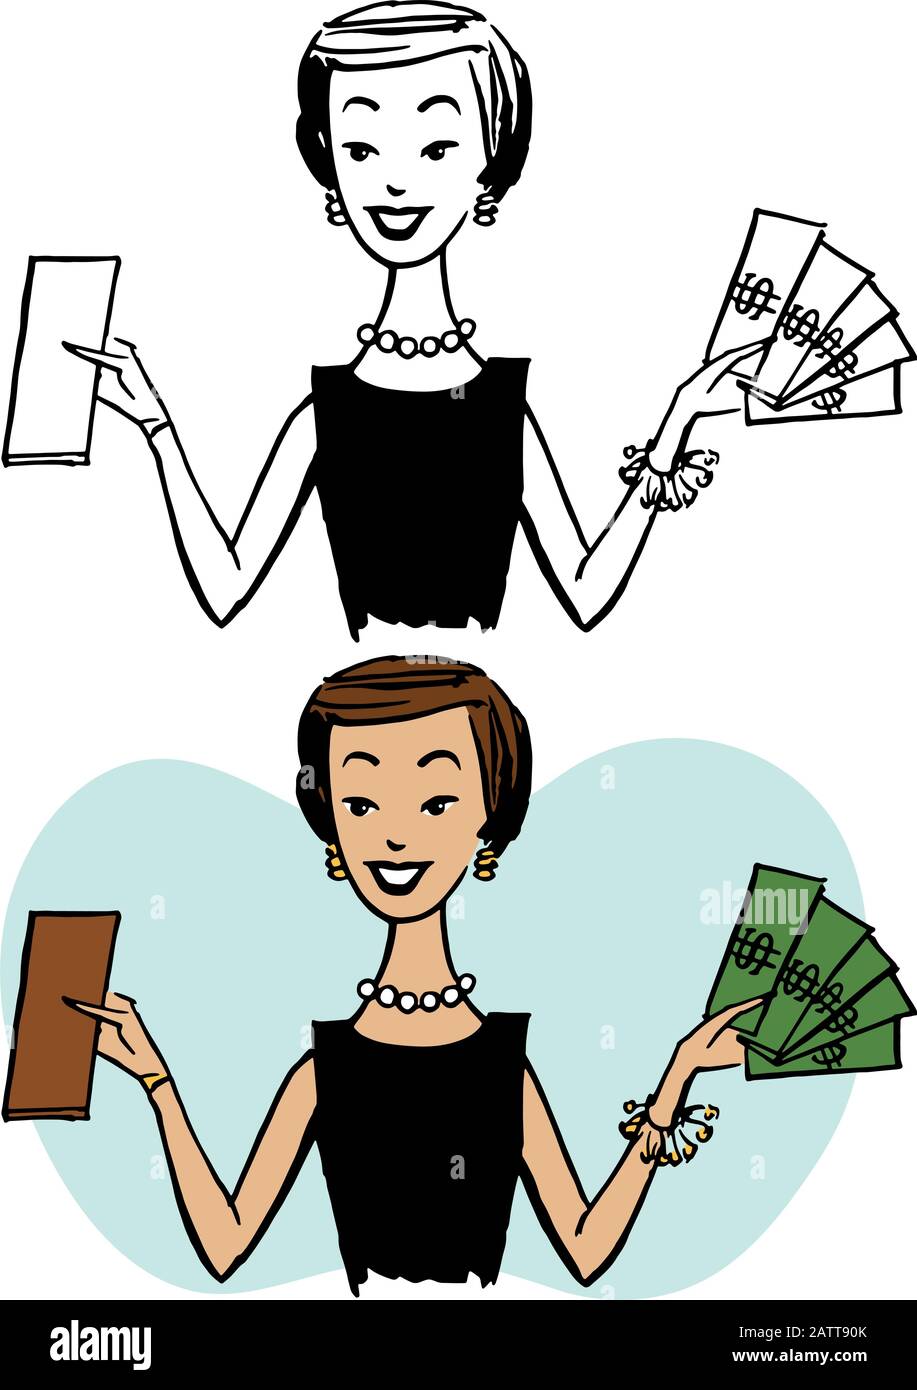 A cartoon of a smiling woman holding a wallet and money. Stock Vector